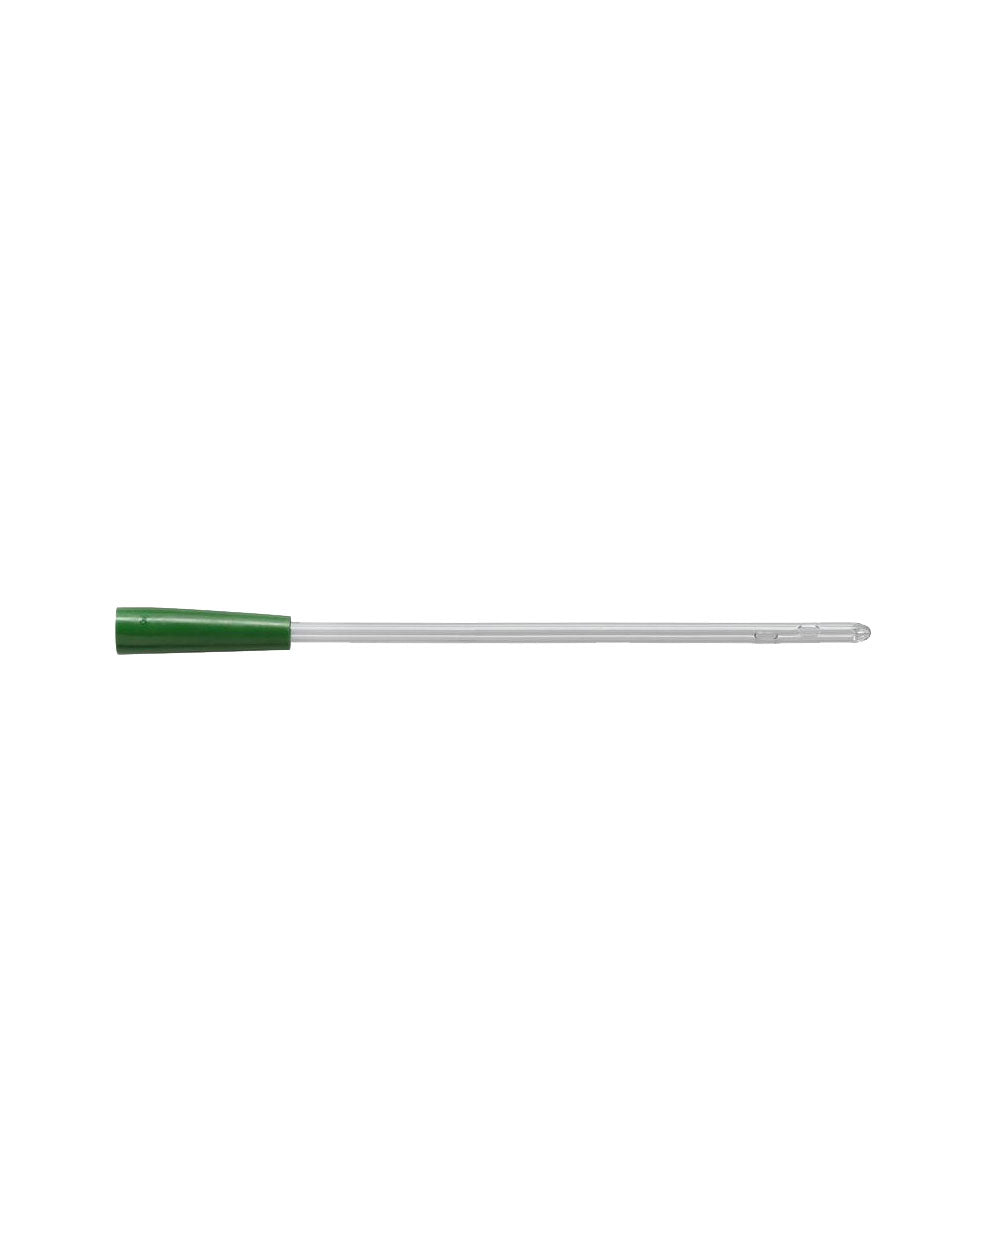 Coloplast Self-Cath Urethral Catheter Male Coude Olive with Guide Stripe 810  10FR 16" (40cm) - 30 Per Box